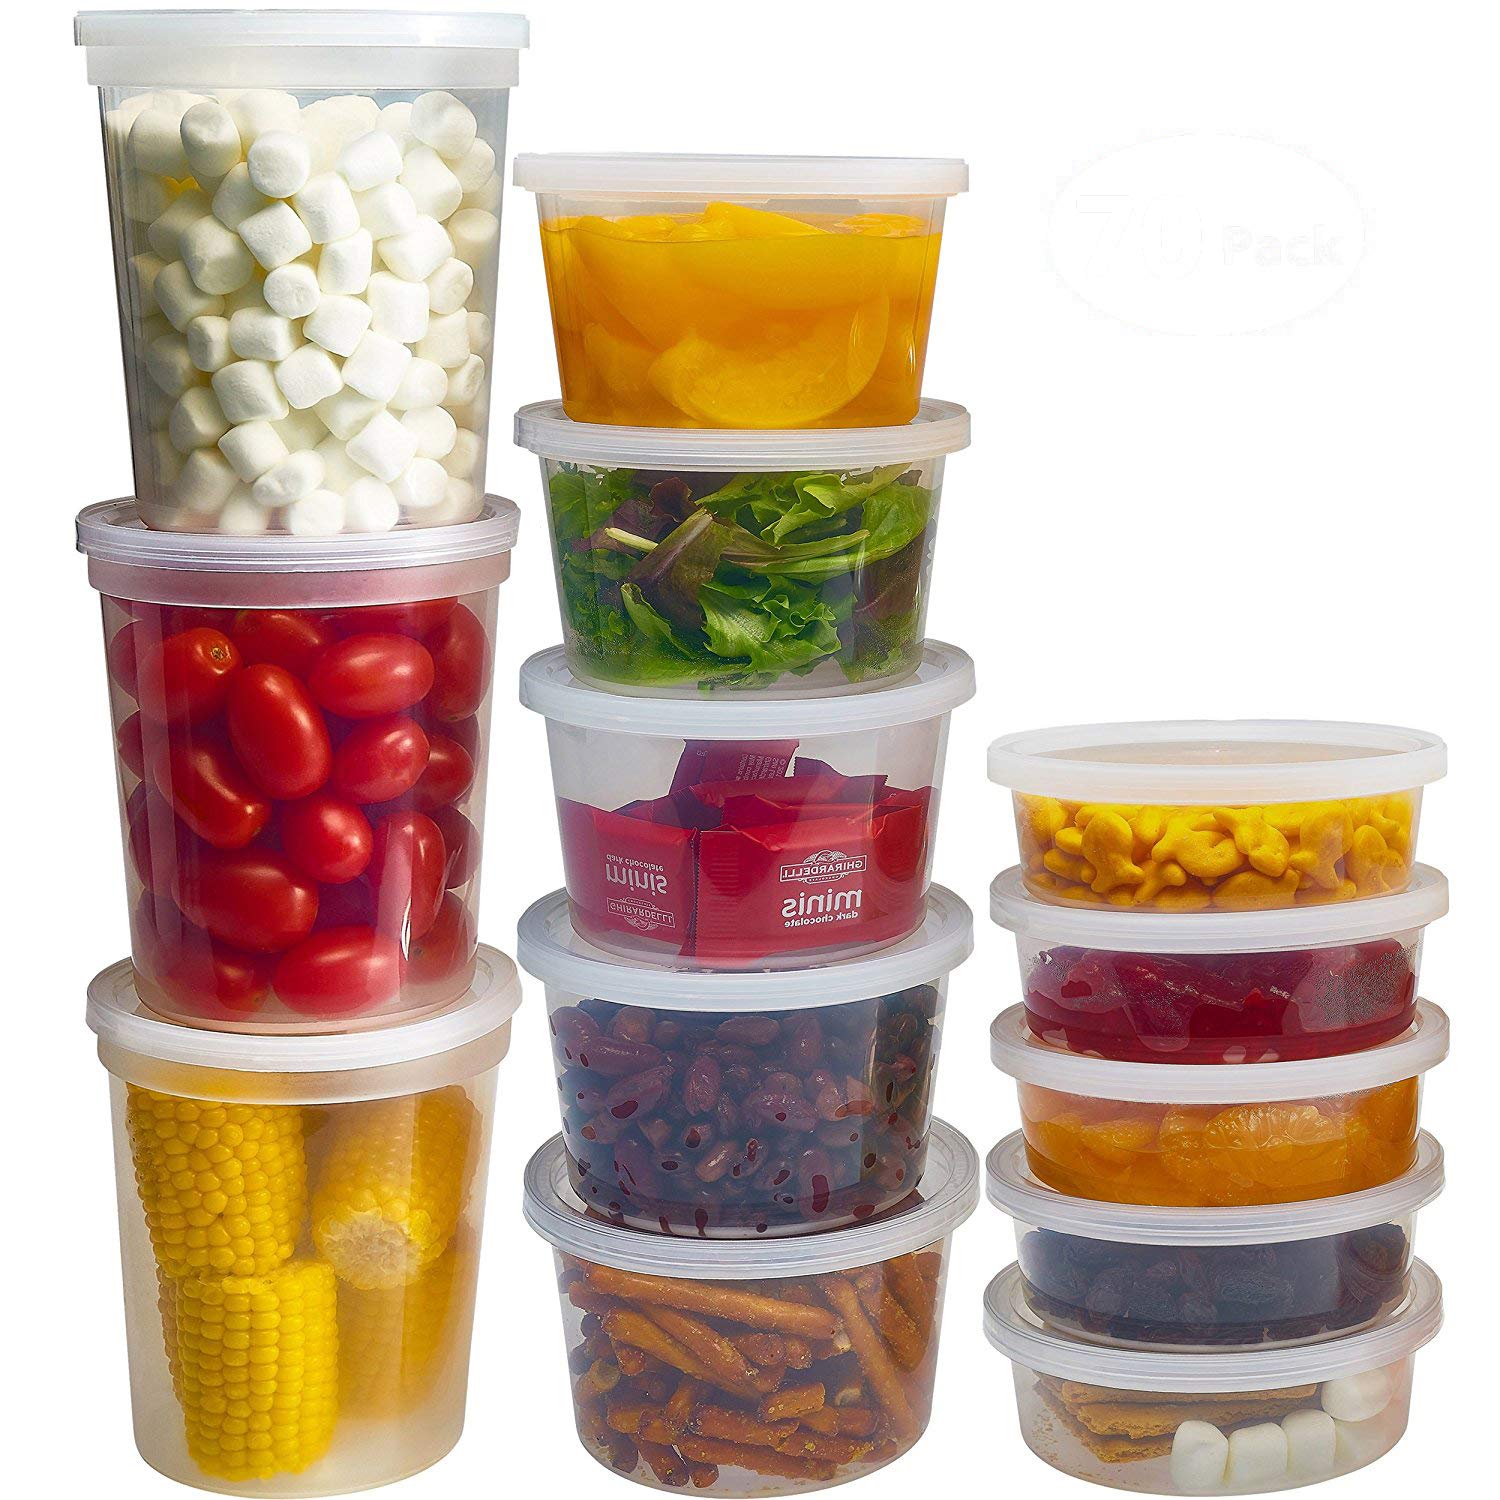 32 PCS Food Storage Containers with Airtight Lid(16 Stackable Plastic  Containers with 16 Lids), 100% Leakproof & BPA-Free Container Sets with  Lids for